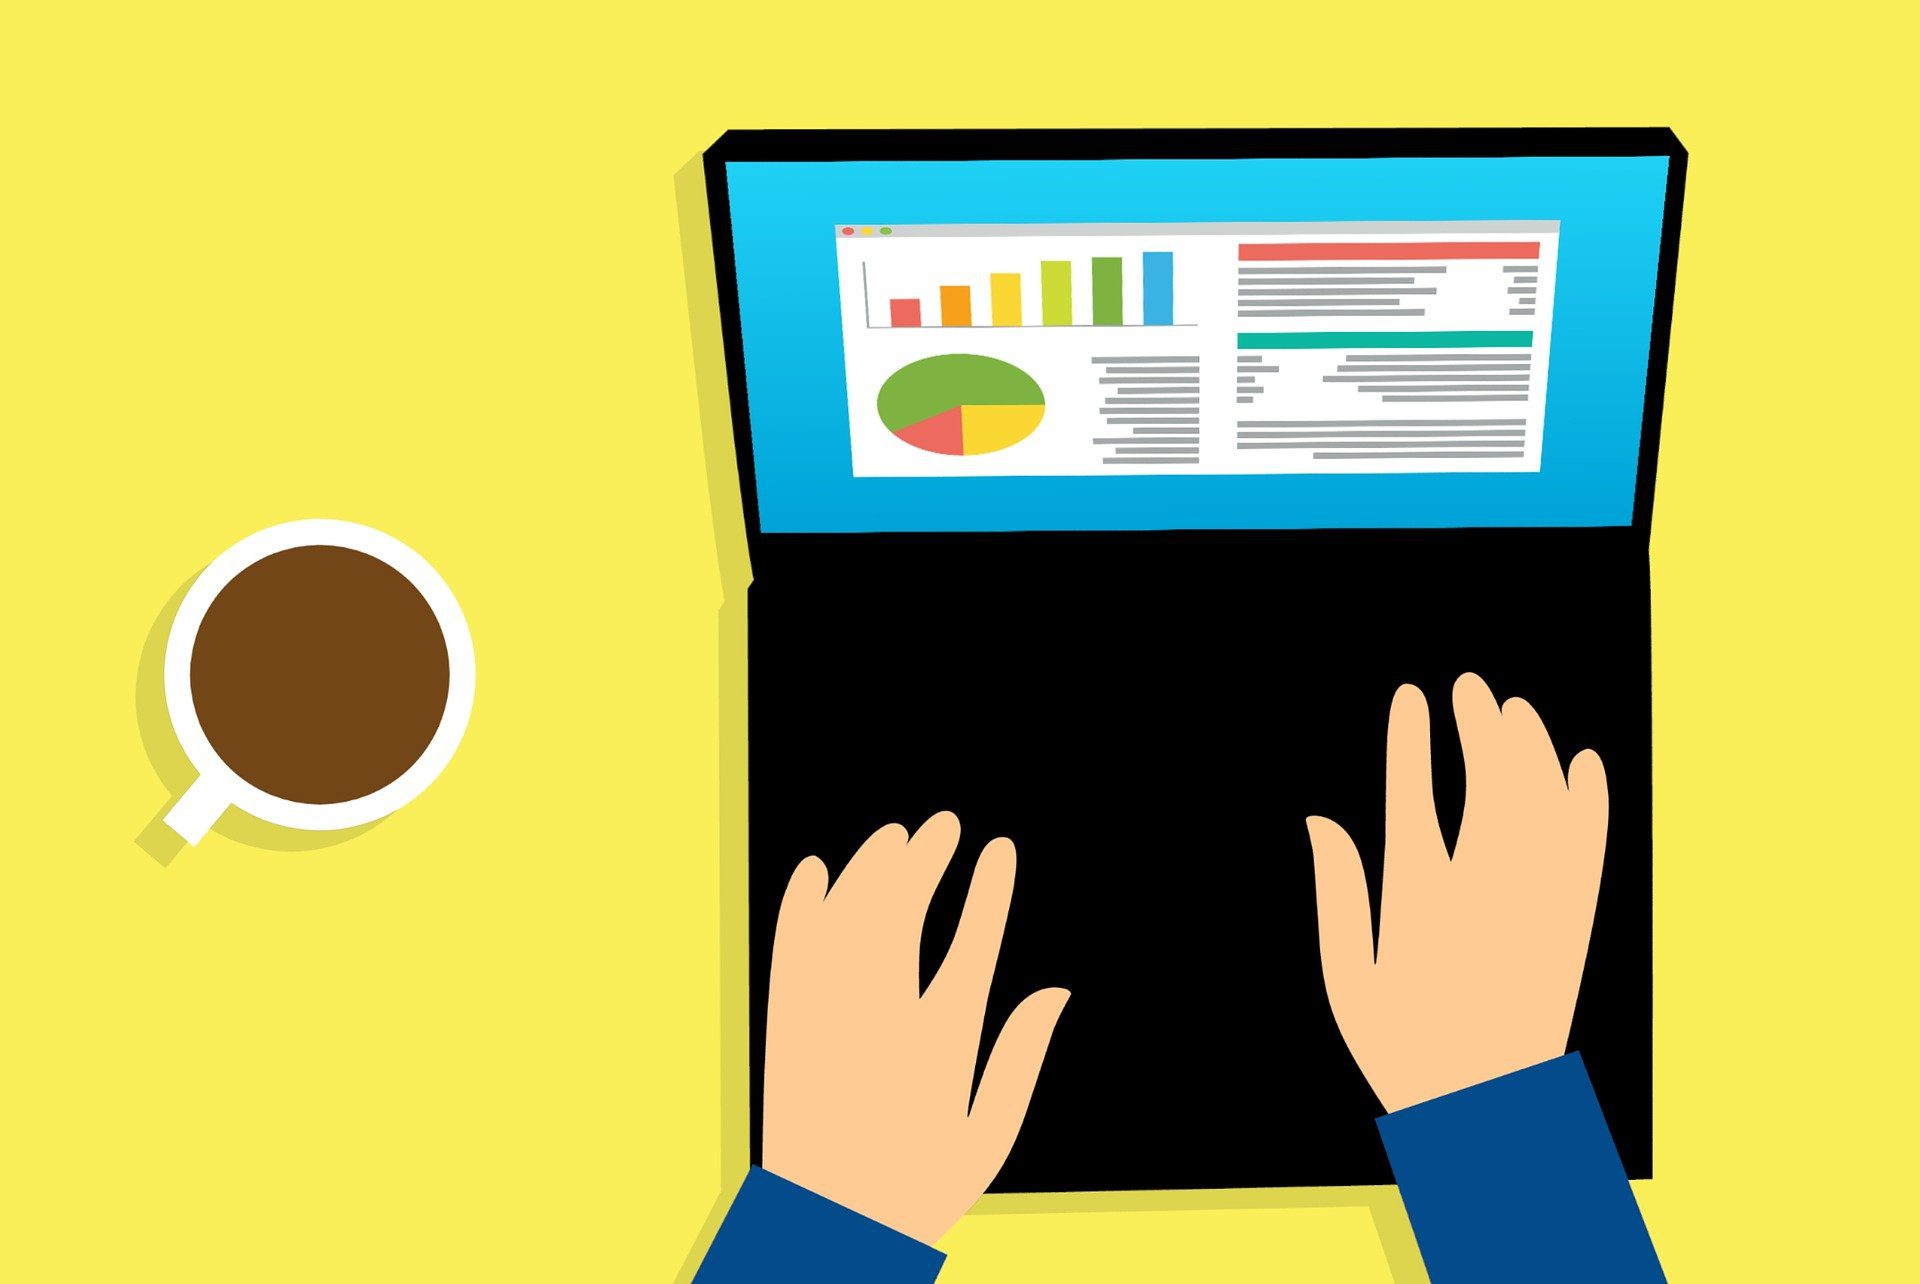 illustration of hands on laptop that shows graphs and analytics, along with a cup of coffee next to the laptop